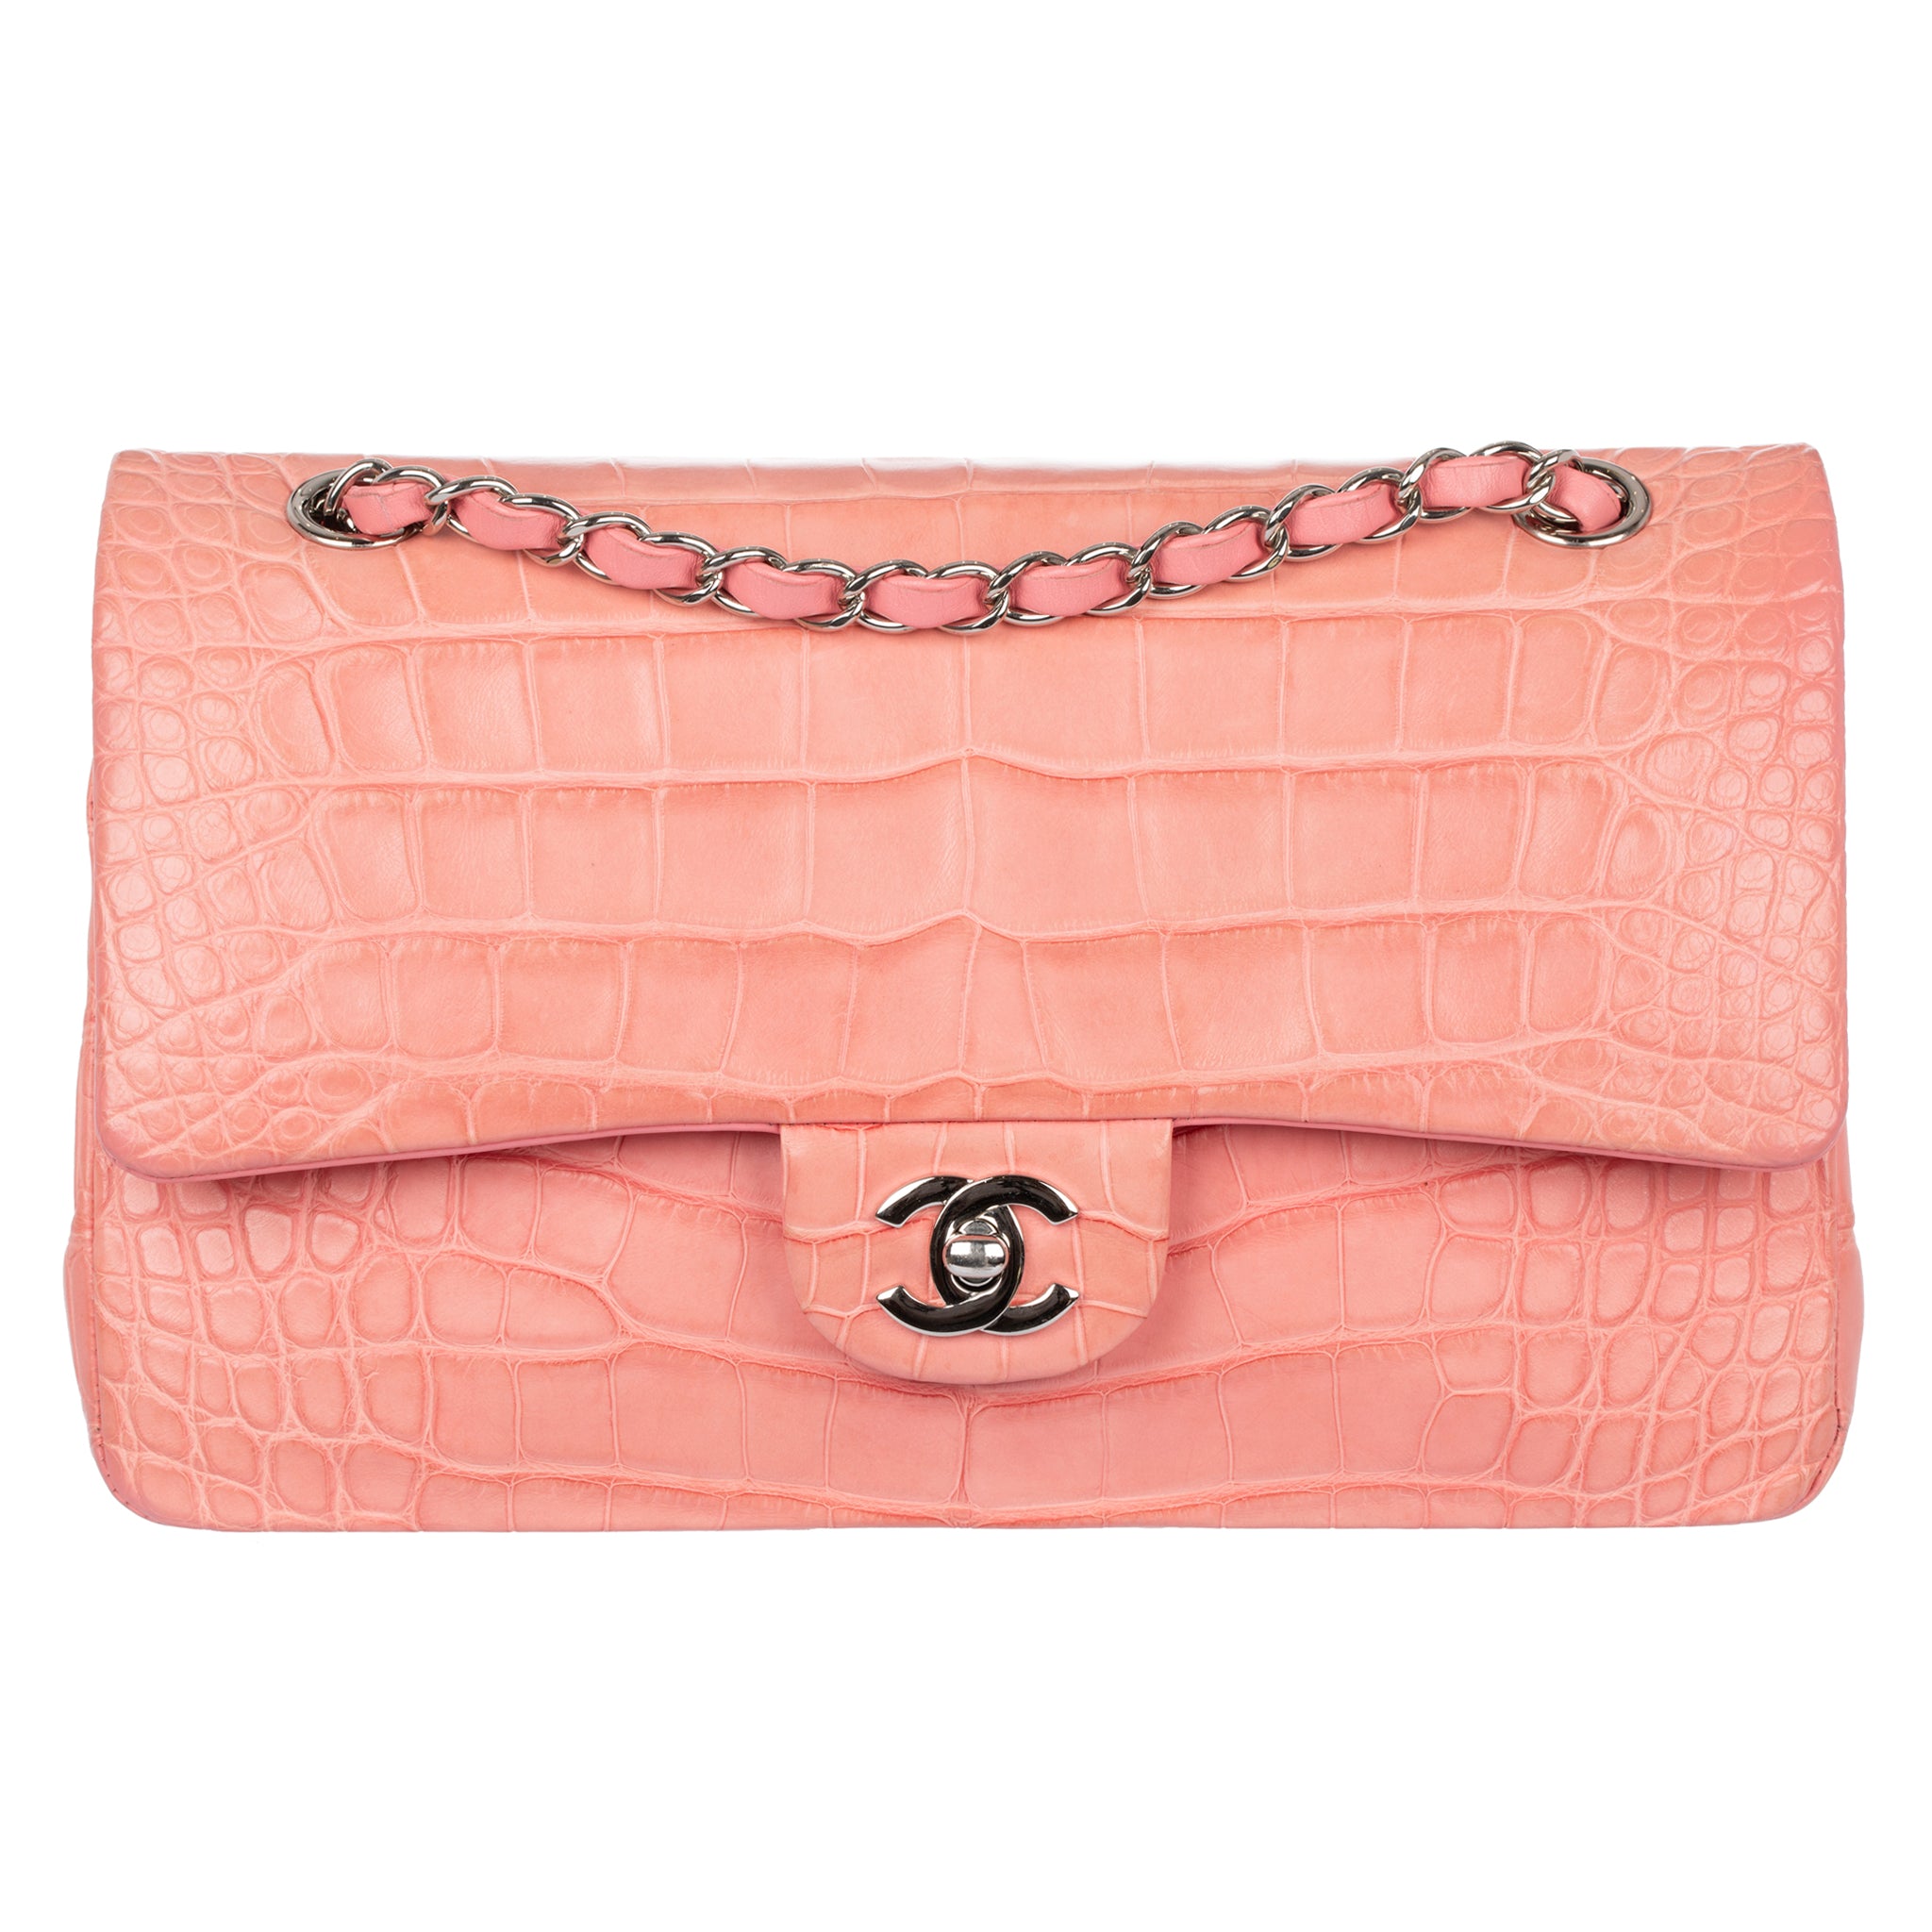 Chanel Medium Double Classic Flap Bag Coral Pink Matte Crocodile Leather Silver Tone Hardware